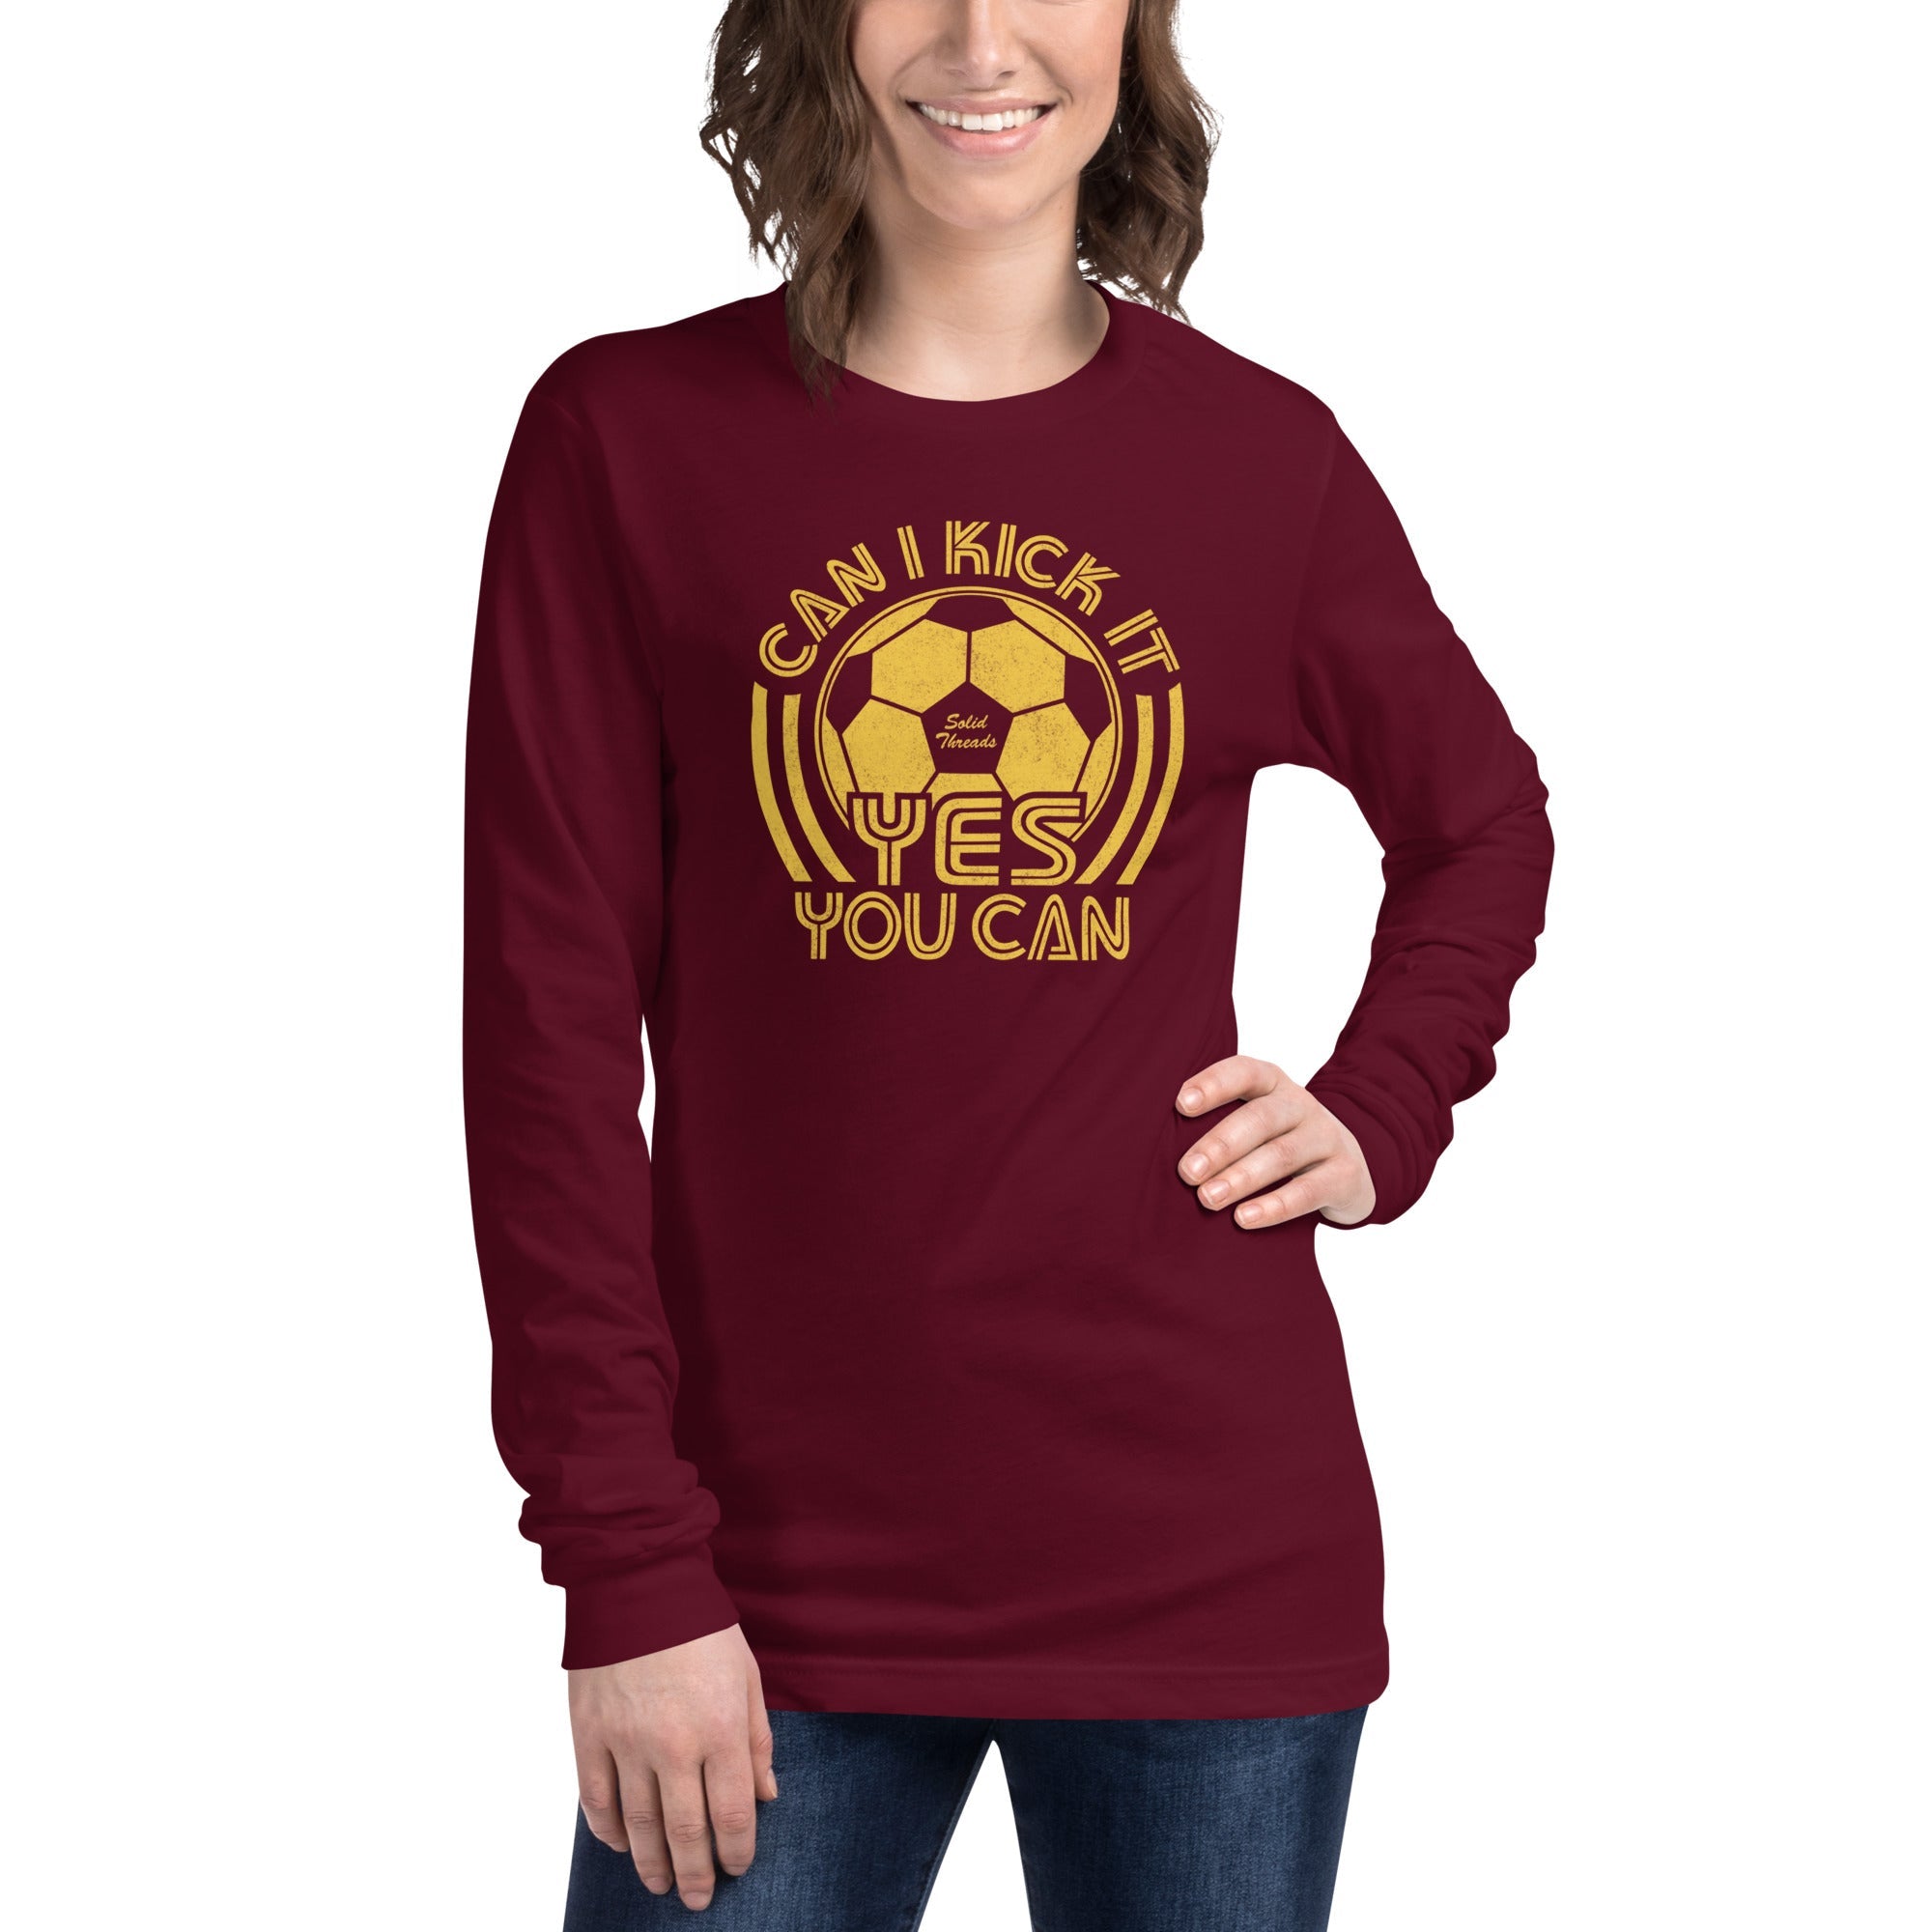 Unisex Can I Kick It, Yes You Can Long Sleeve Funny Graphic Tee | Vintage Soccer Maroon T shirt on Model | Solid Threads